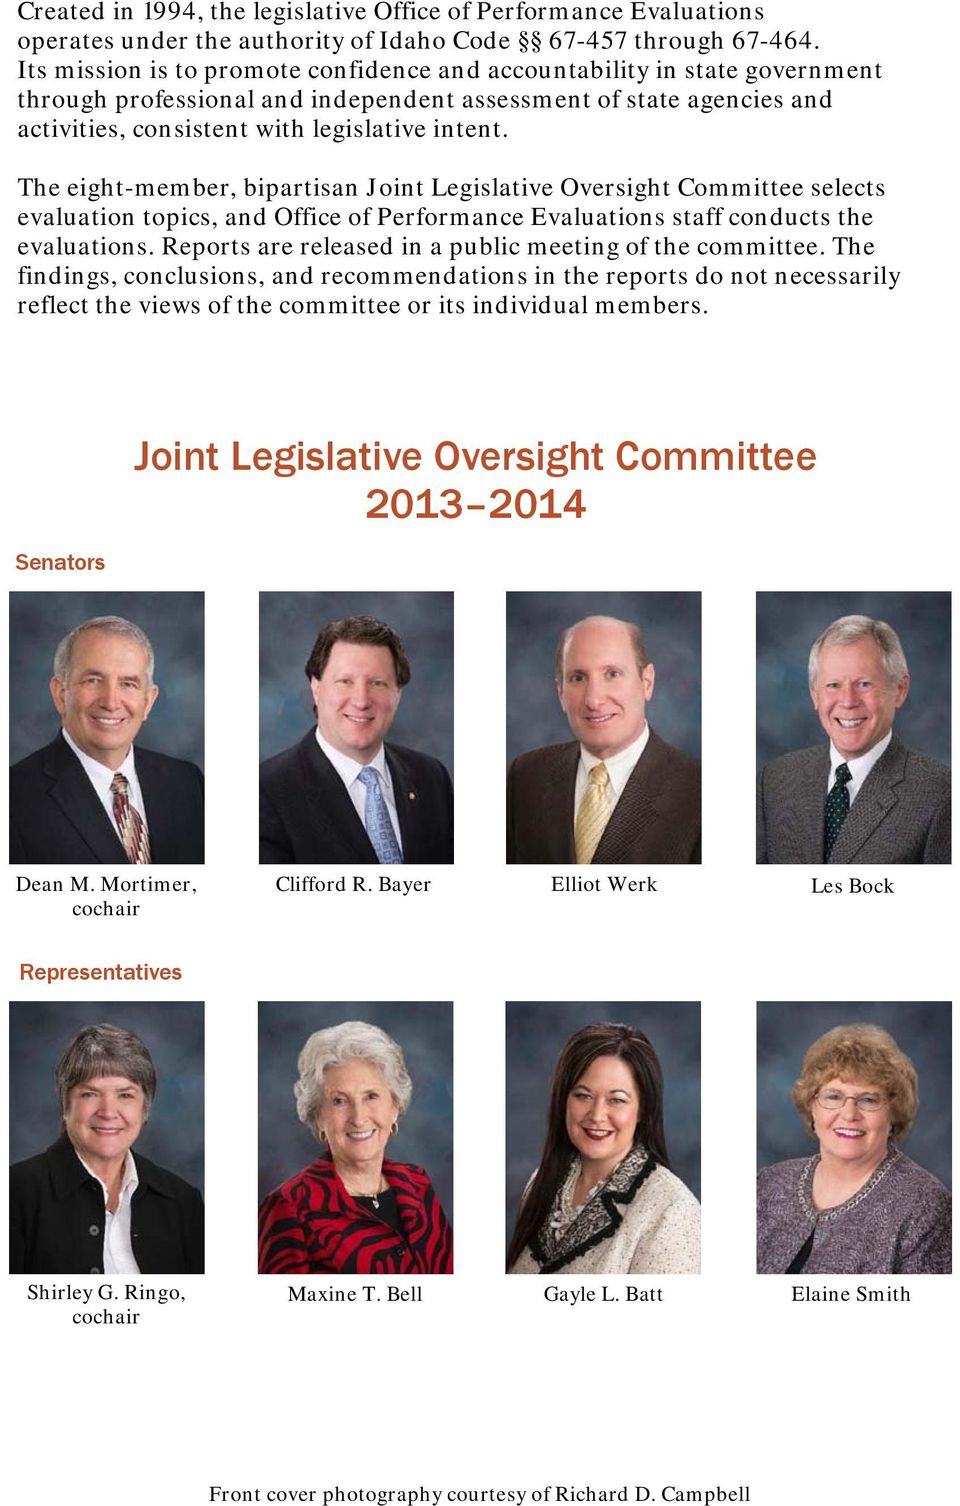 The eight-member, bipartisan Joint Legislative Oversight Committee selects evaluation topics, and Office of Performance Evaluations staff conducts the evaluations.